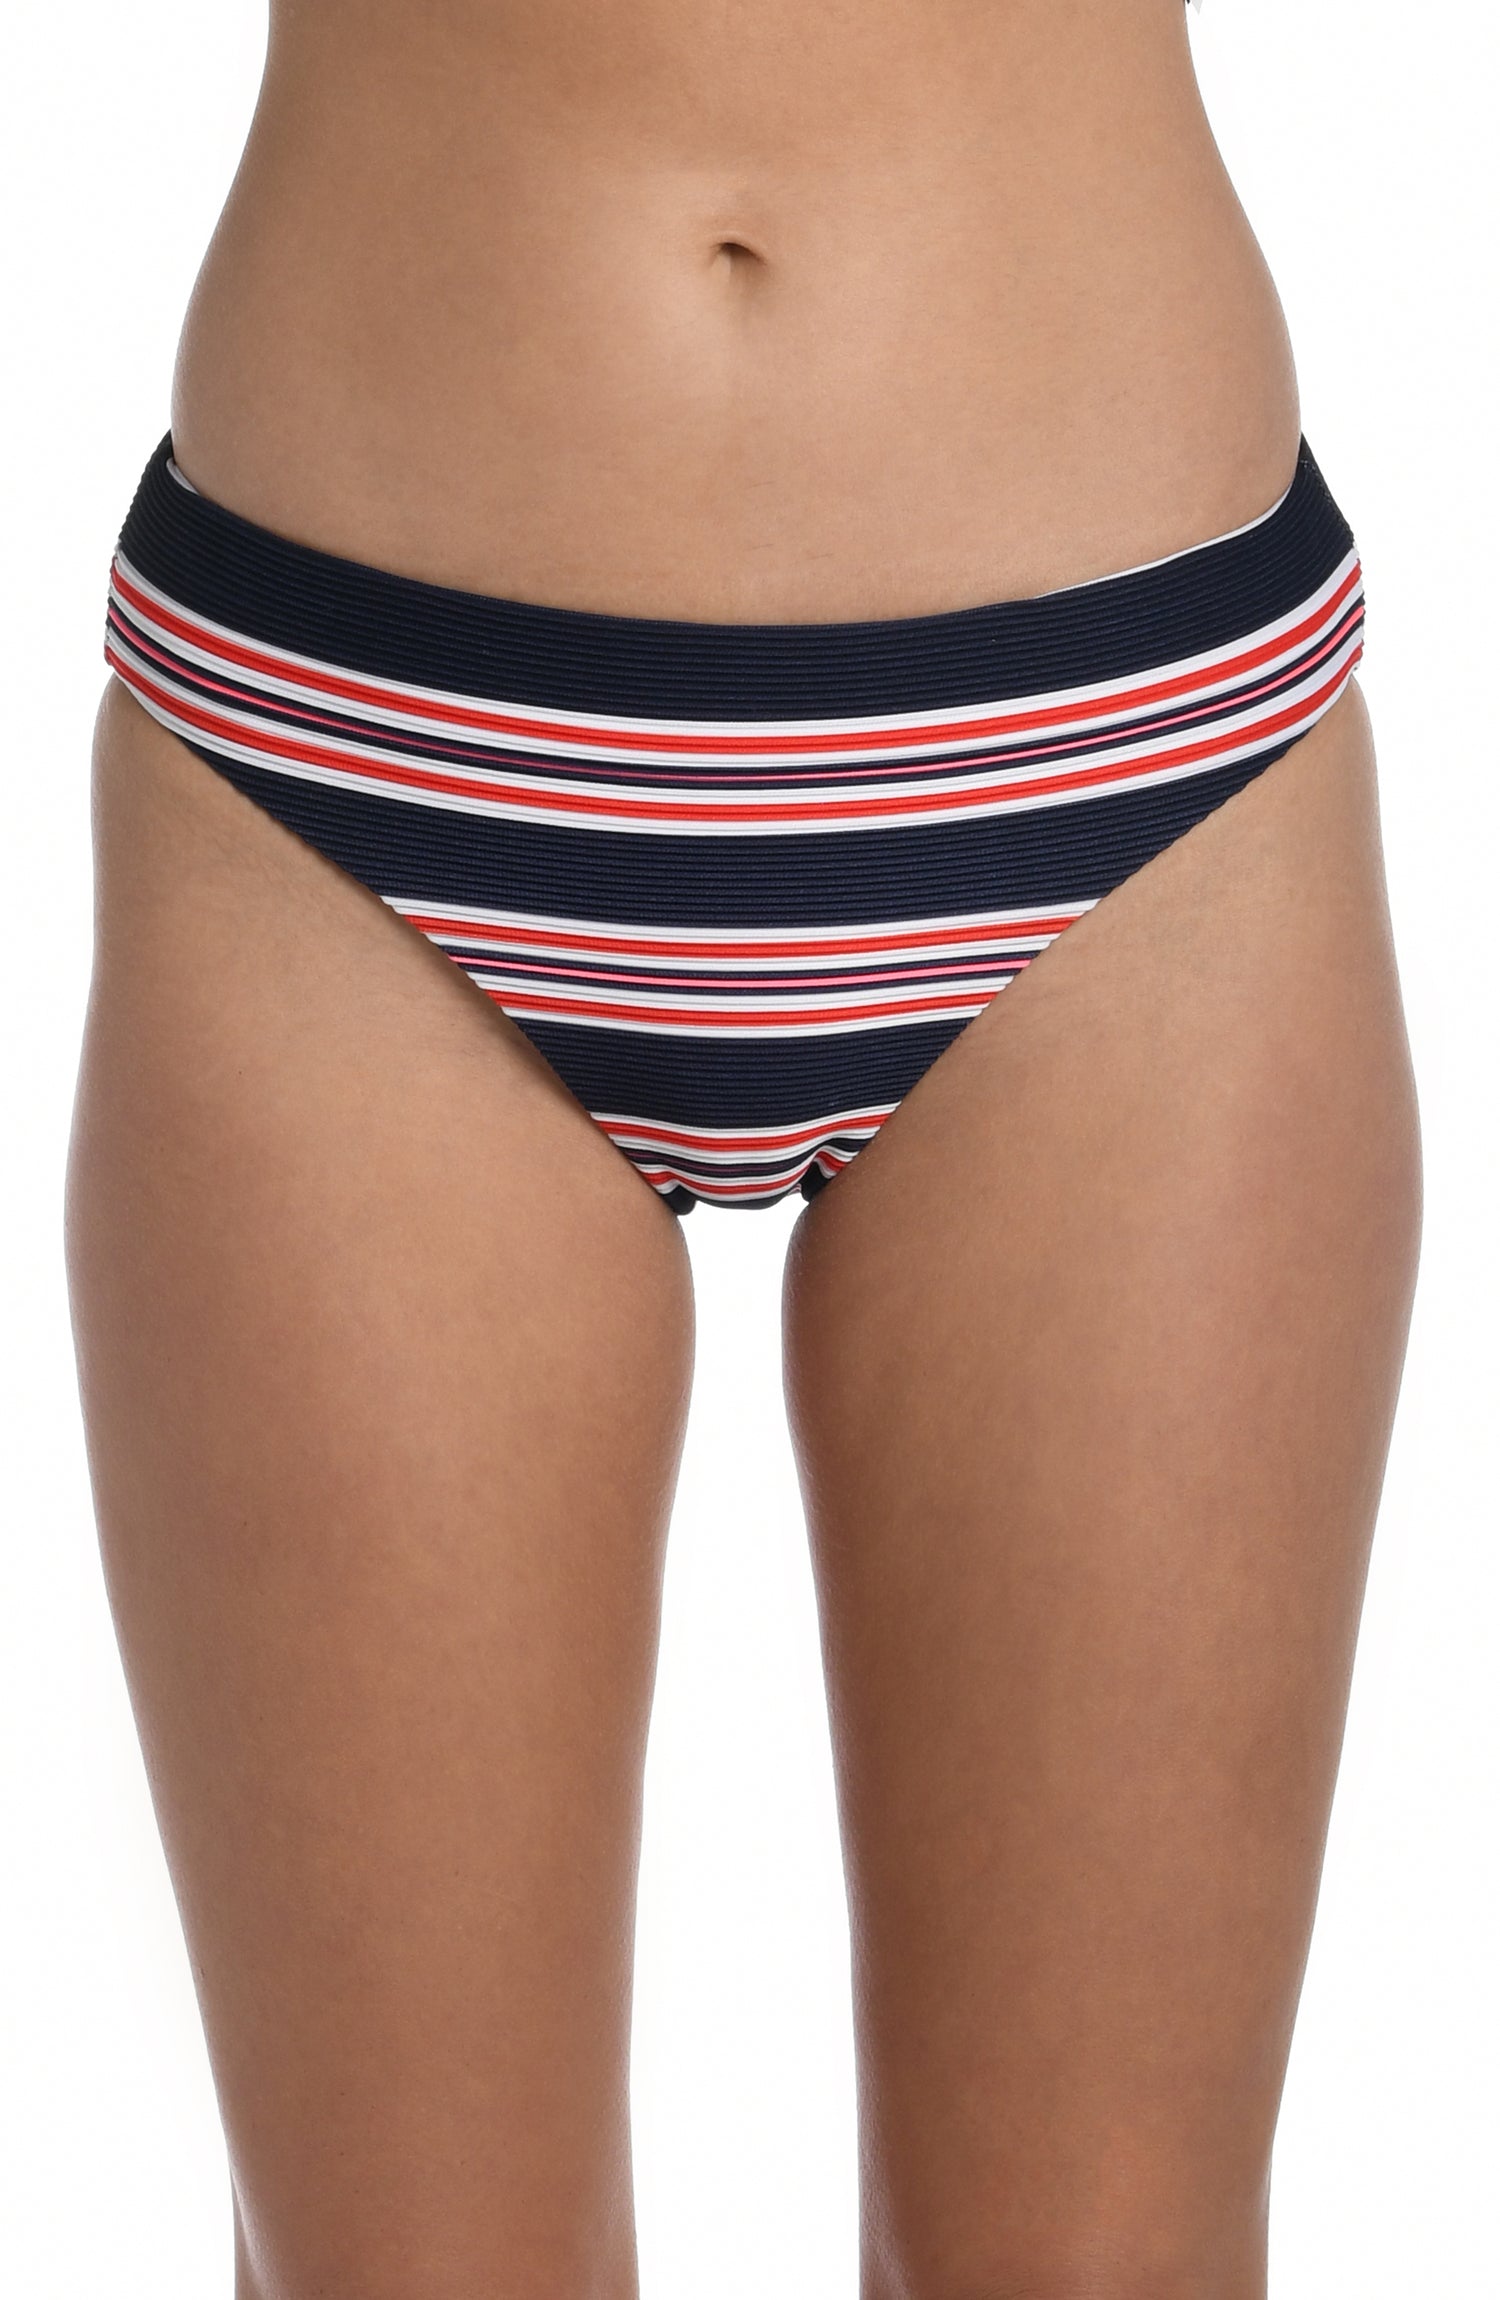 Model is wearing a red, white, and blue striped patterned hipster bottom from our Sailor Stripe collection!